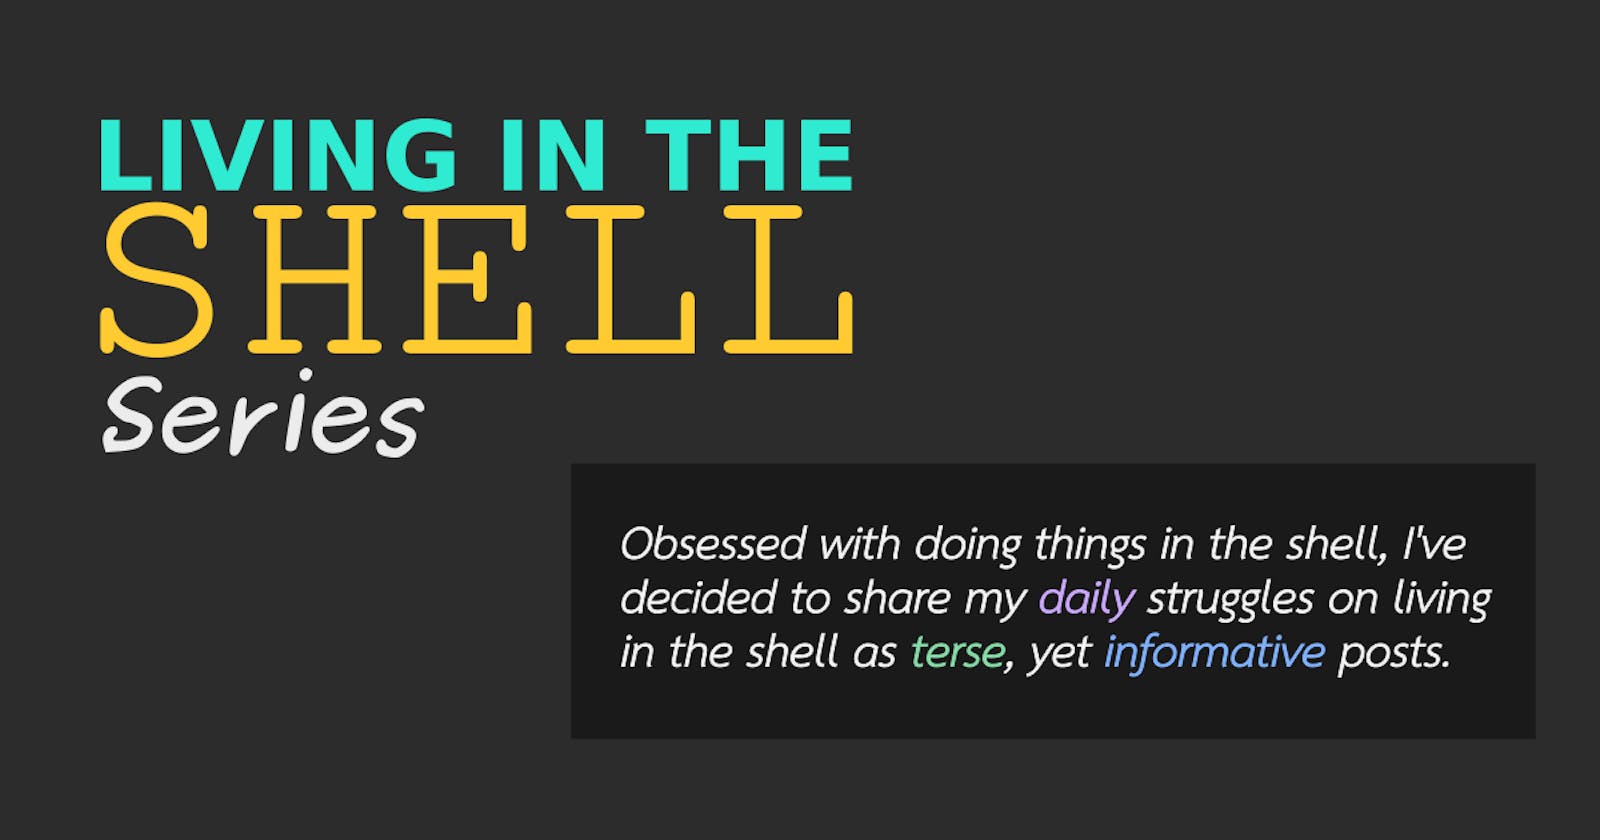 Living in the Shell #17; curl (HTTP/S Client) (Part 2)